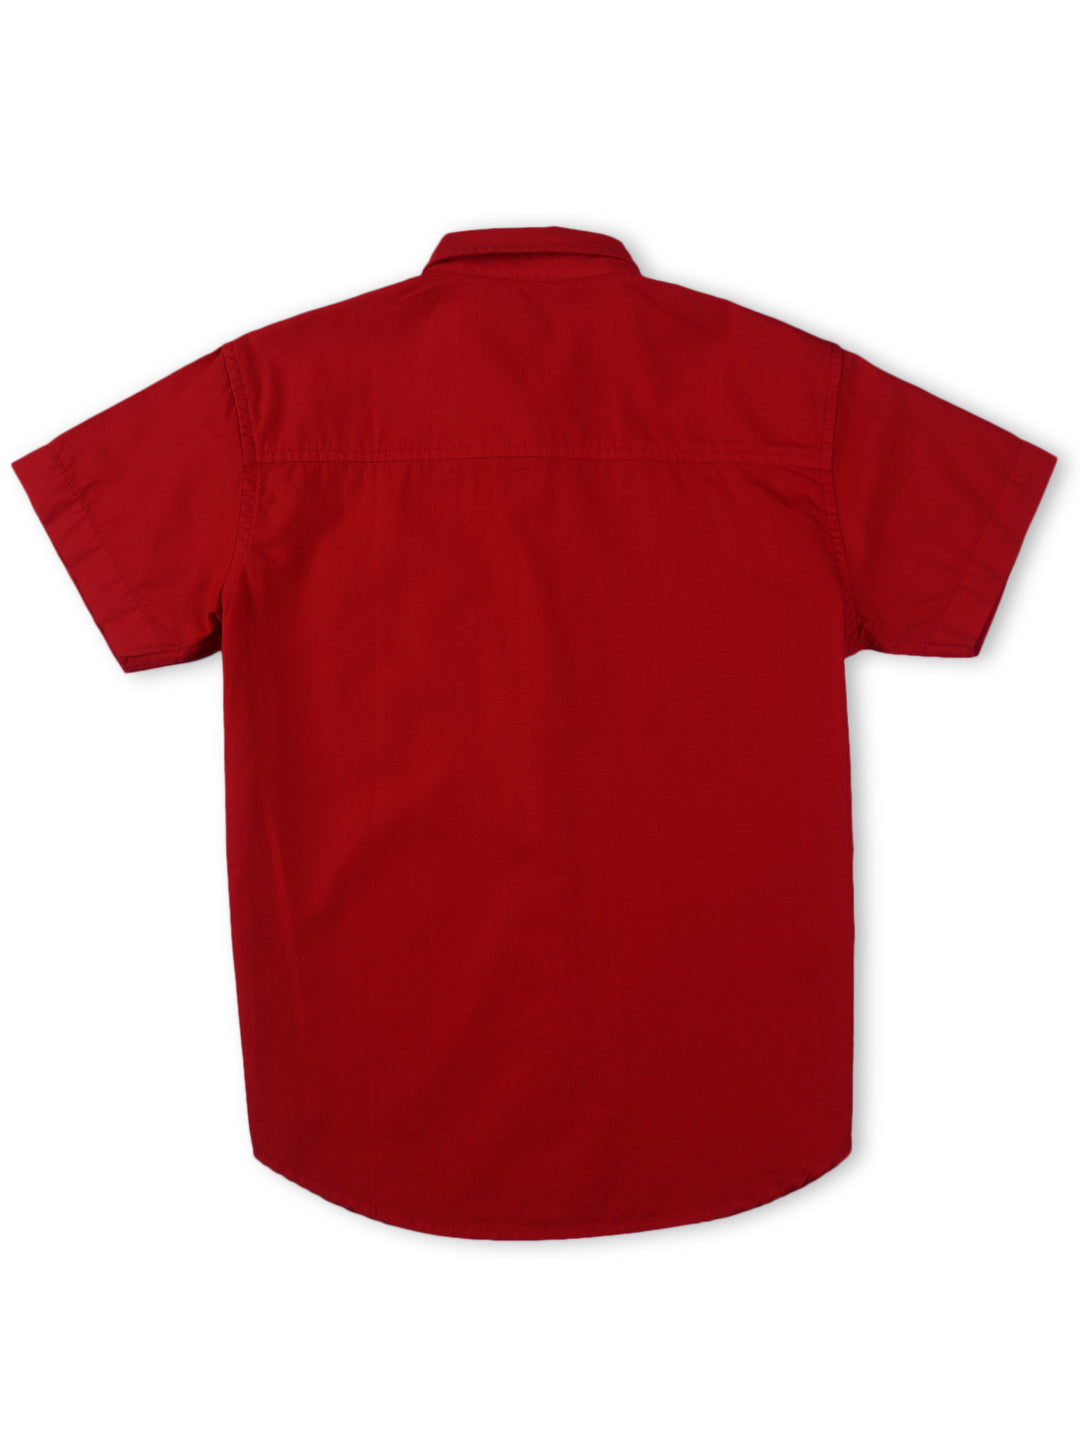 Boys Red Cotton Solid Shirt